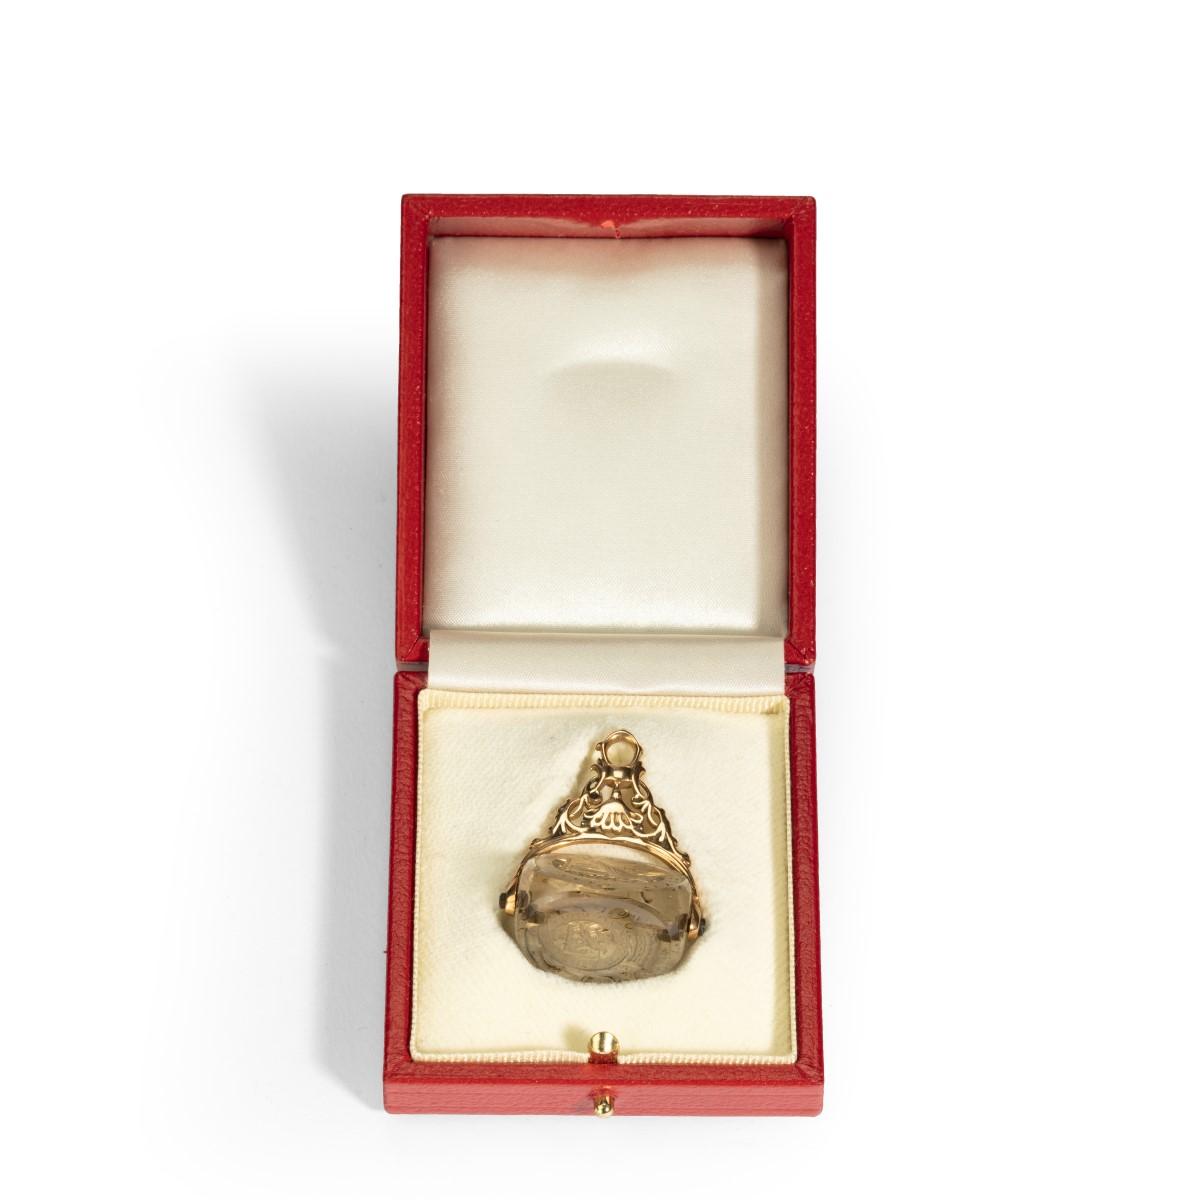 Admiral Viscount Bridport’s gold and hardstone armorial swivel fob seal